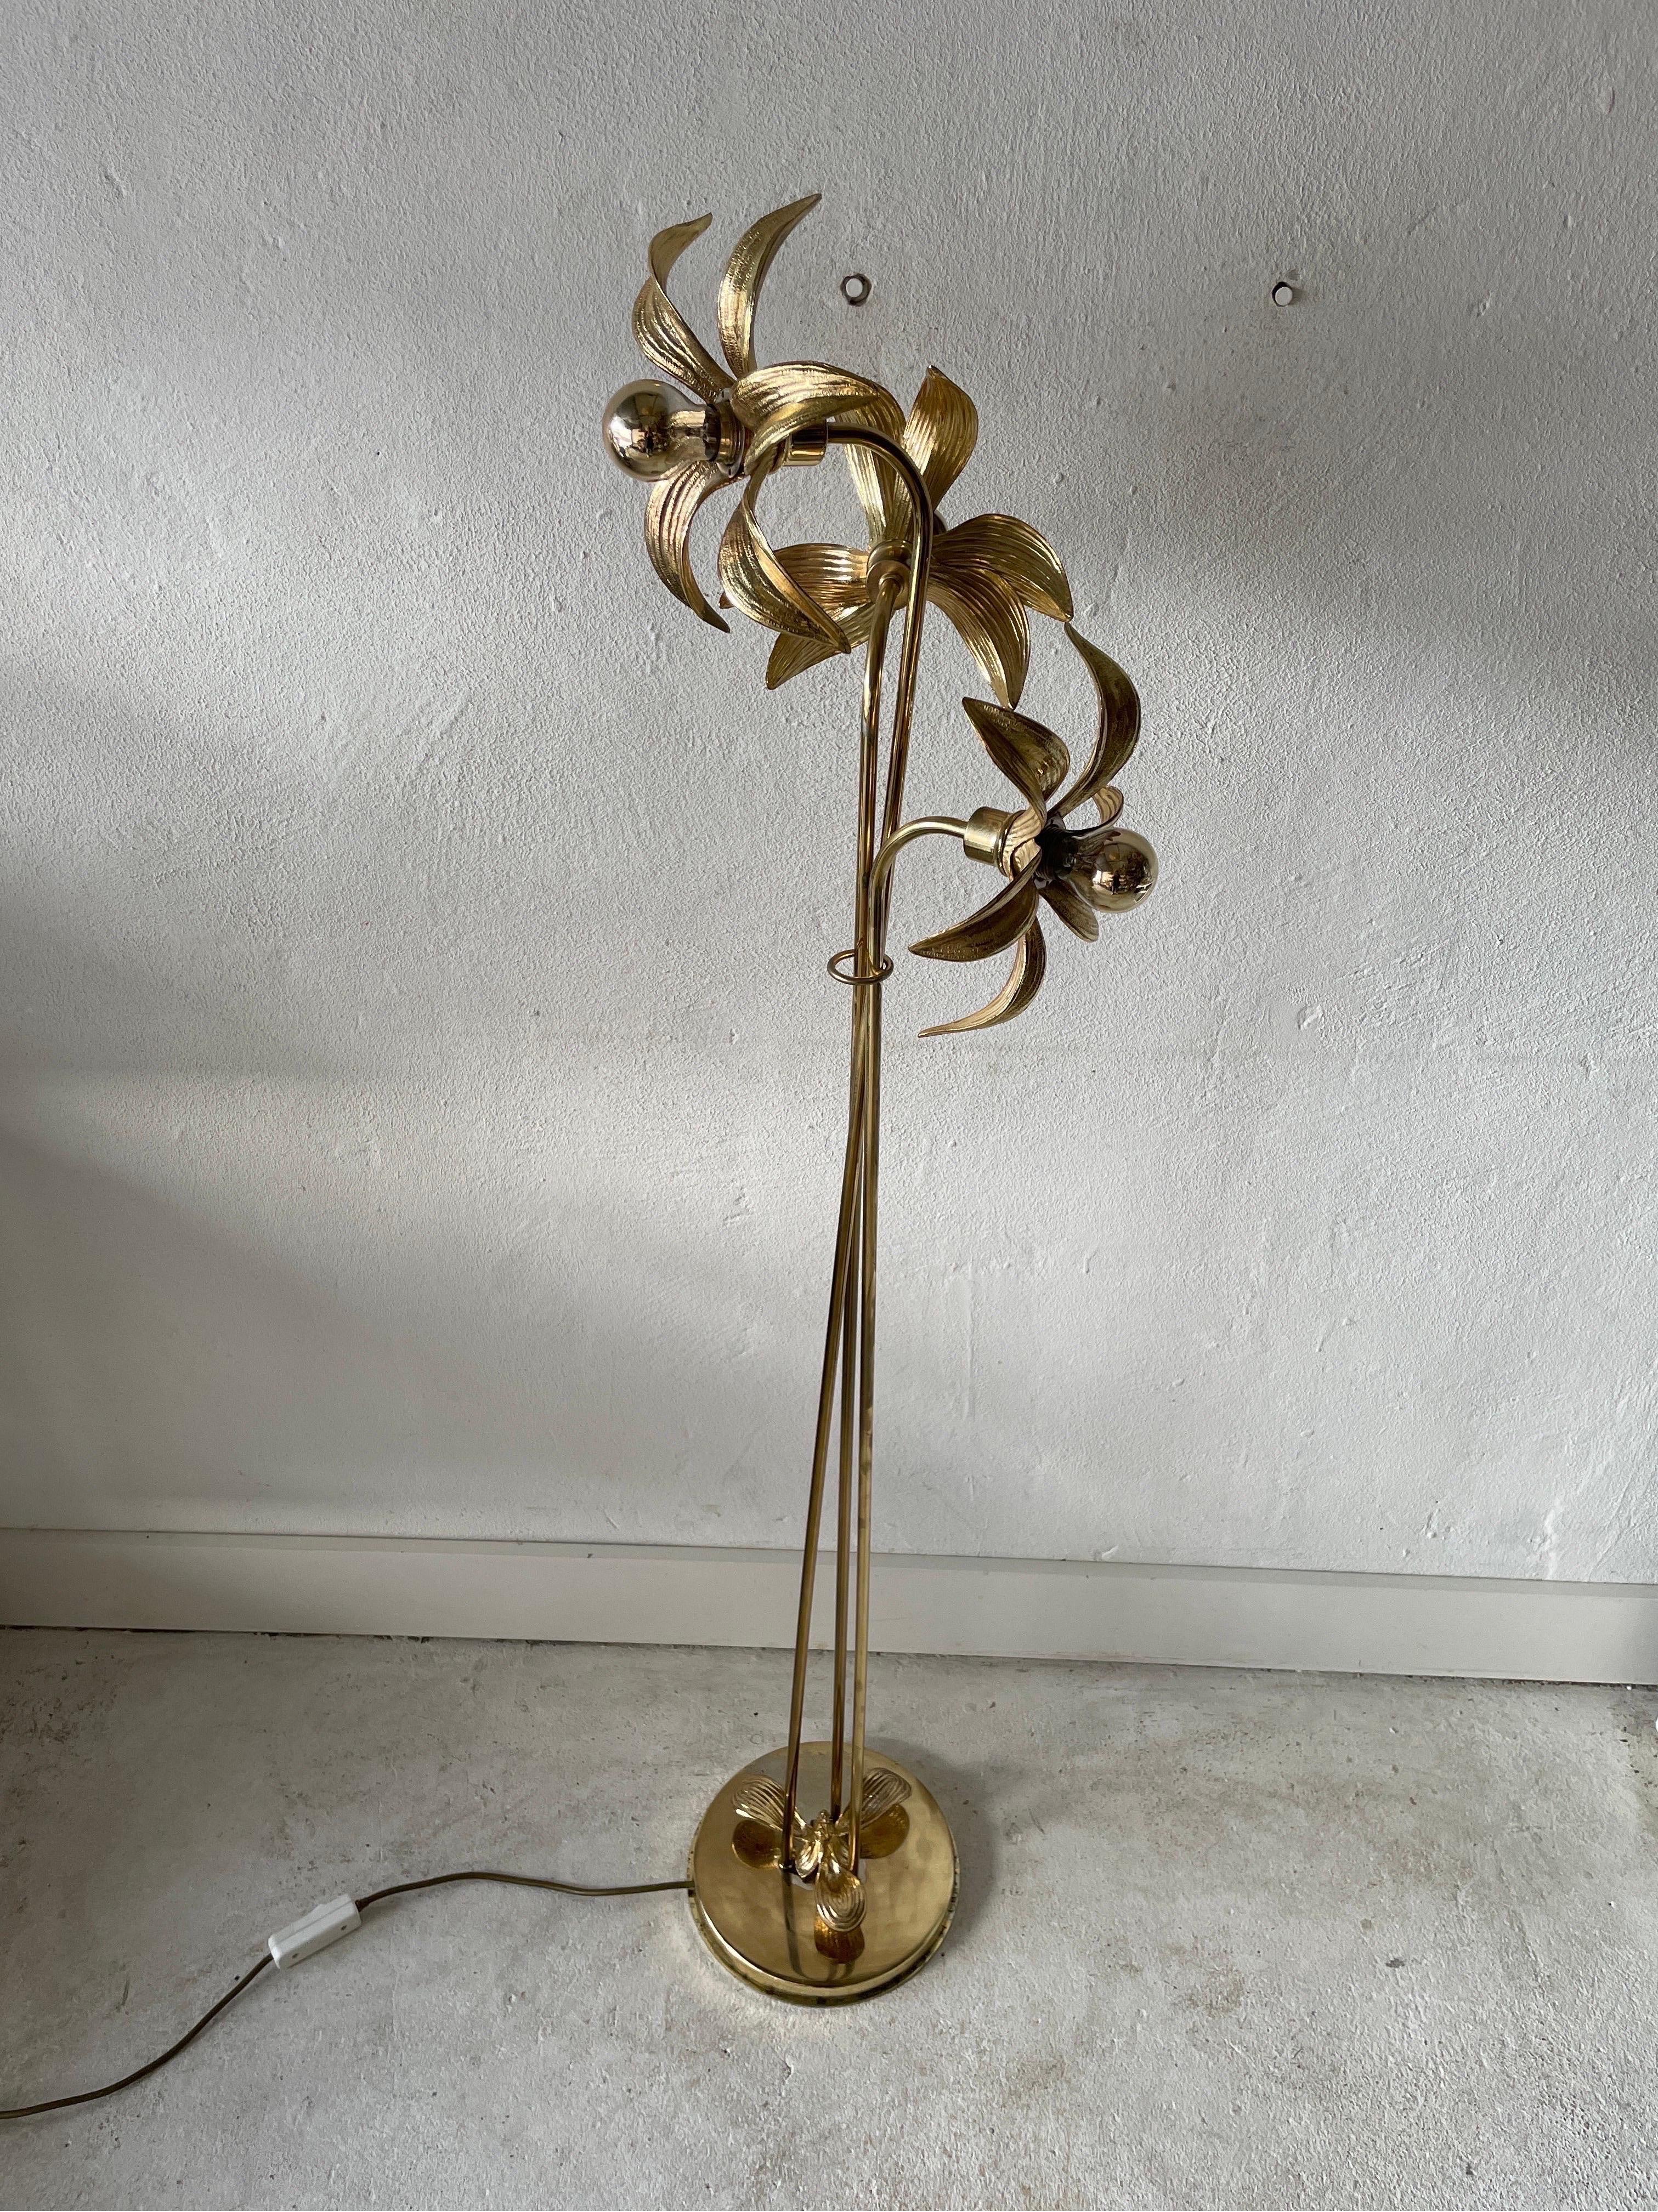 Triple flower shade full brass floor lamp by Willy Daro for Massive, 1970s, Germany

Lamp is in very good vintage condition.

This lamp works with 3x E14 light bulbs 
Wired and suitable to use with 220V and 110V for all